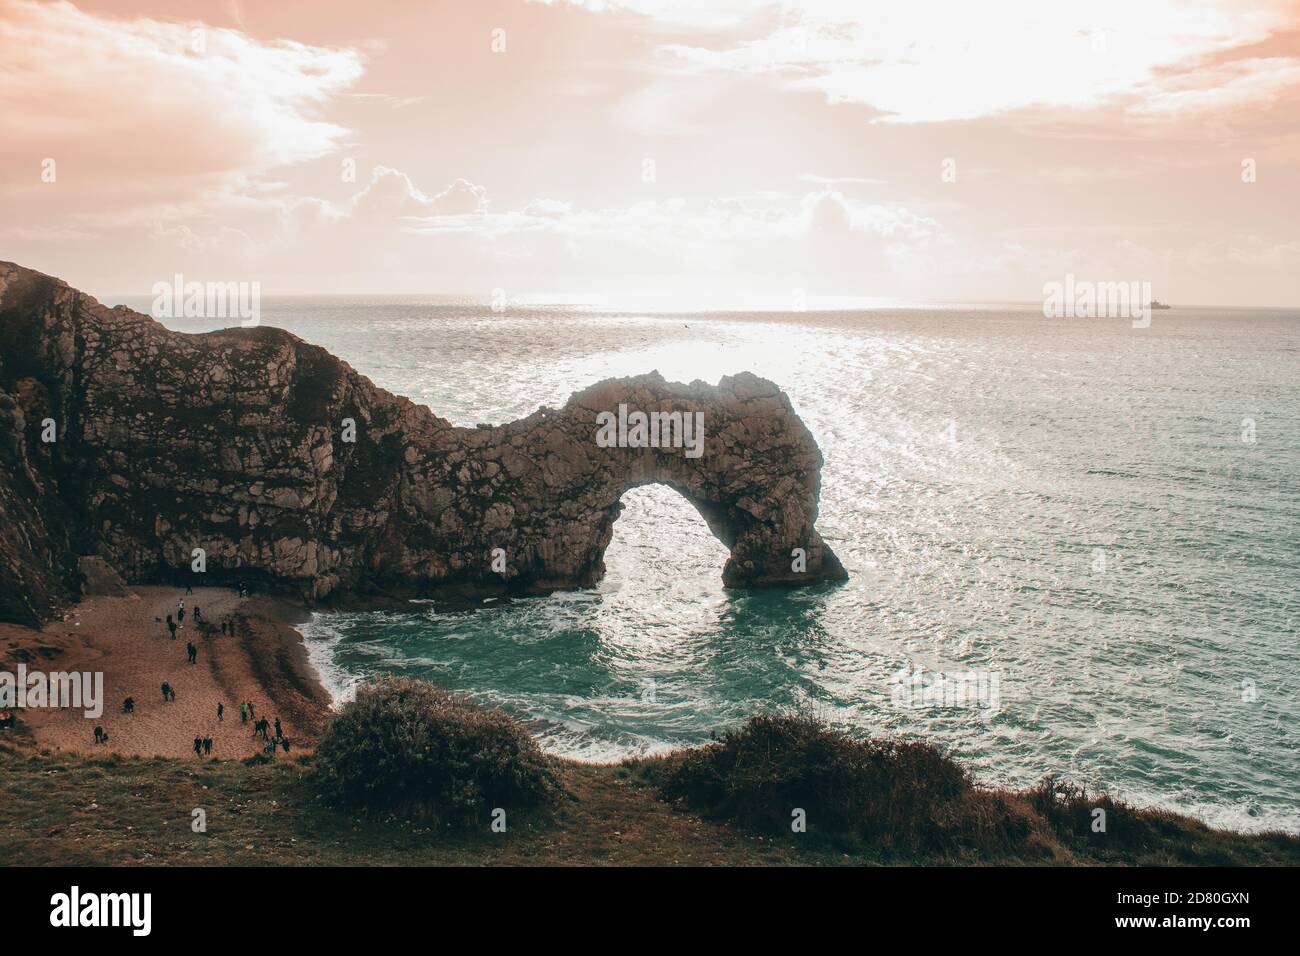 this is an image of the world famous Durdle Door on the Jurassic Coast, this was shot in the evening to get the bright and vibrant sunrise. Stock Photo